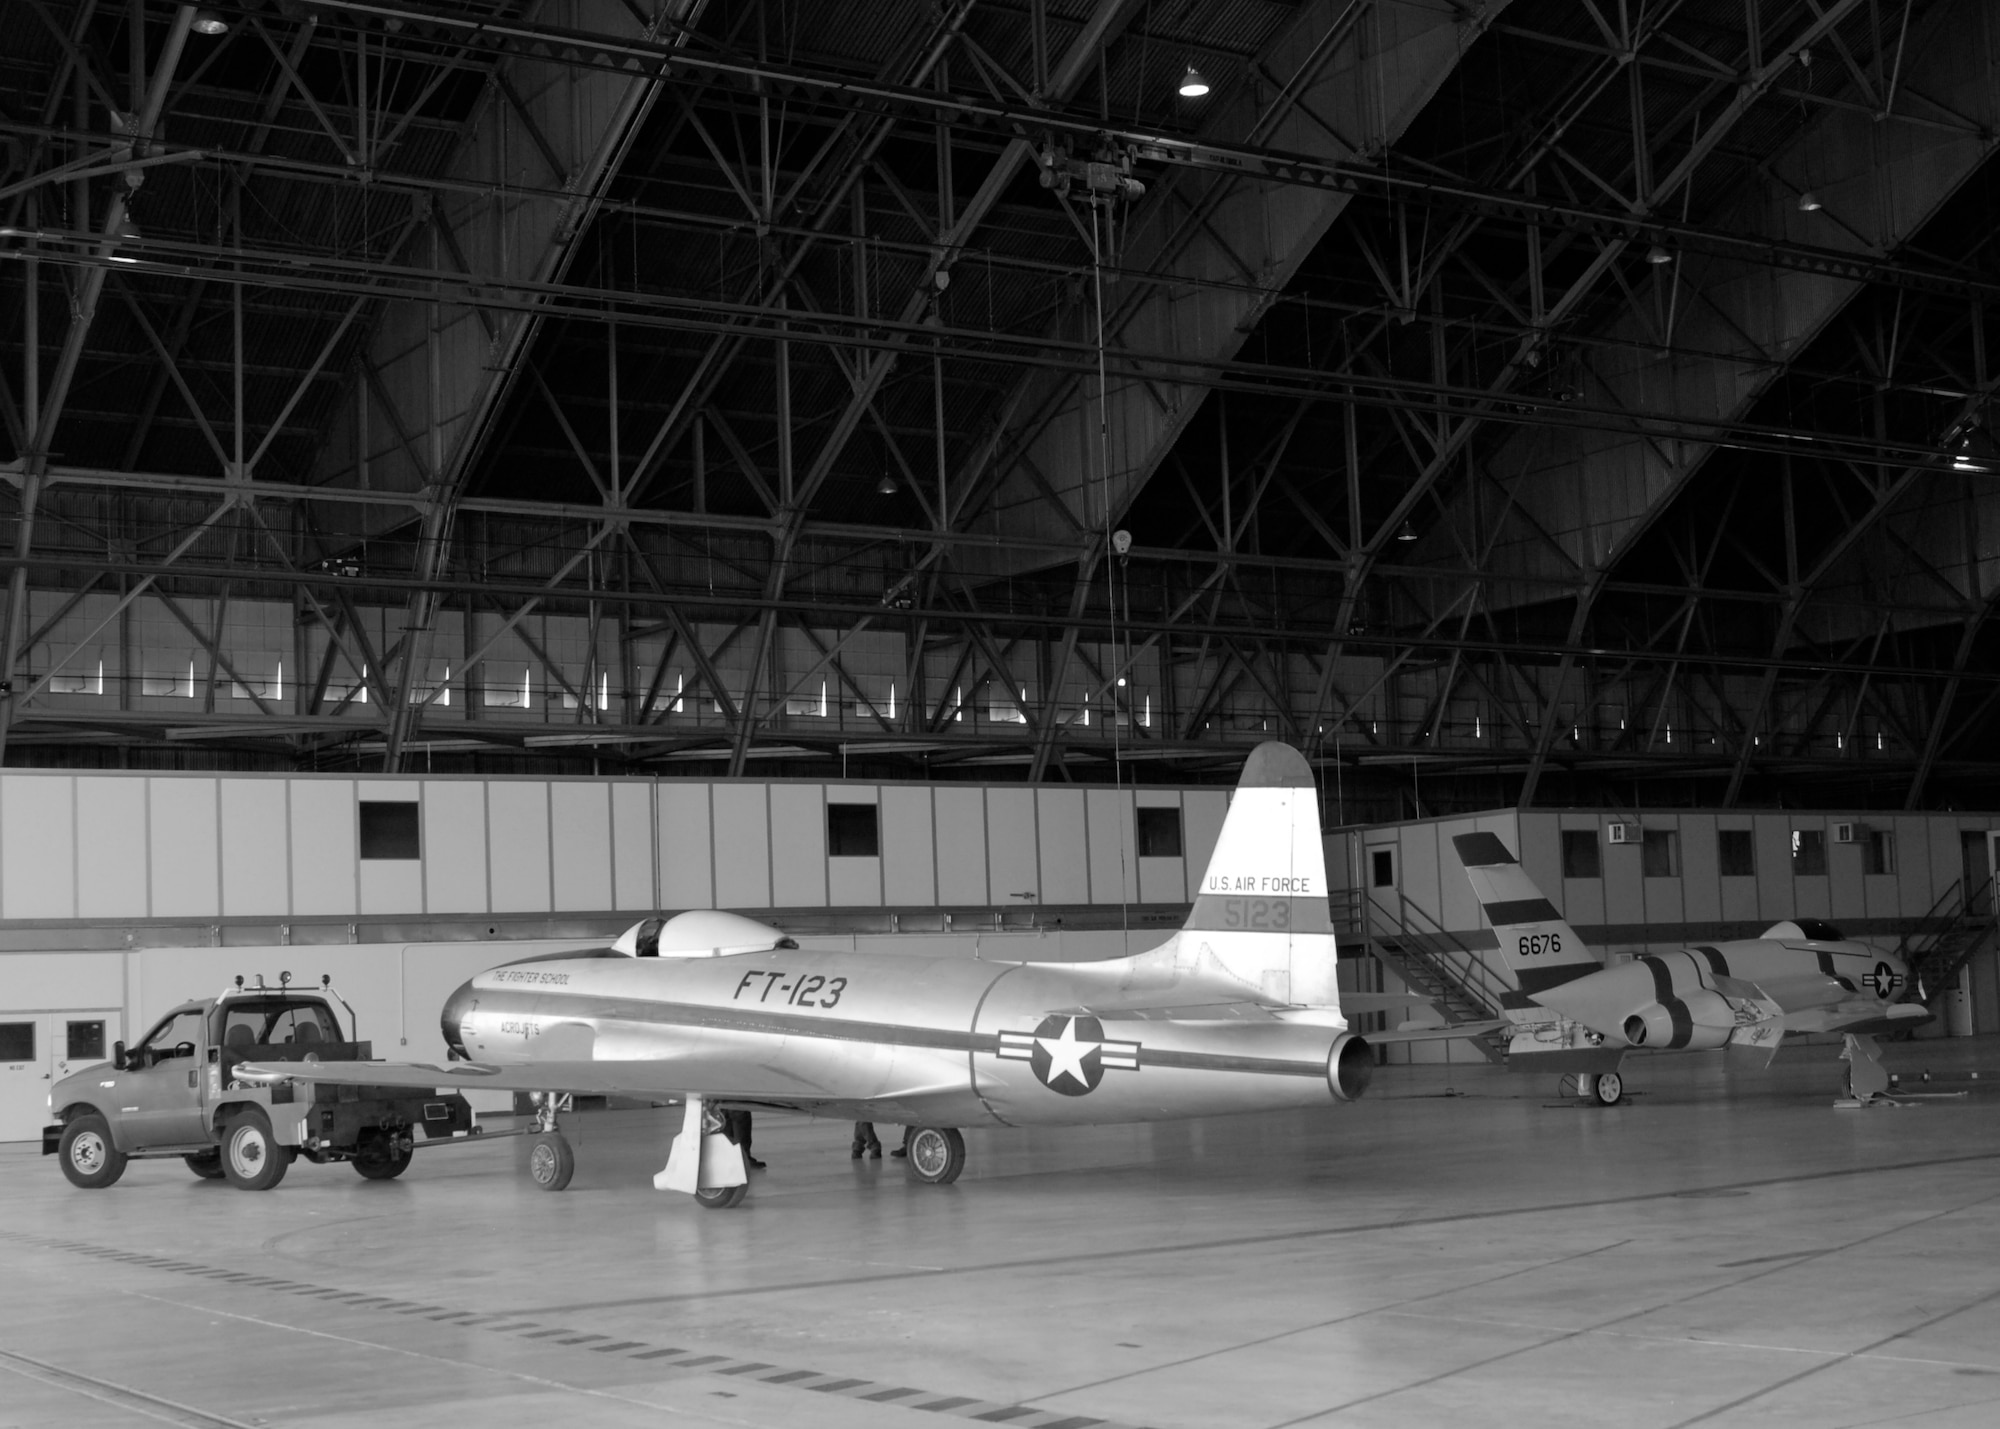 P-80 Shooting Star with X-4 Bantam prior to relocation at Hangar 1864. (U.S. Air Force Photo by Laura Mowry)